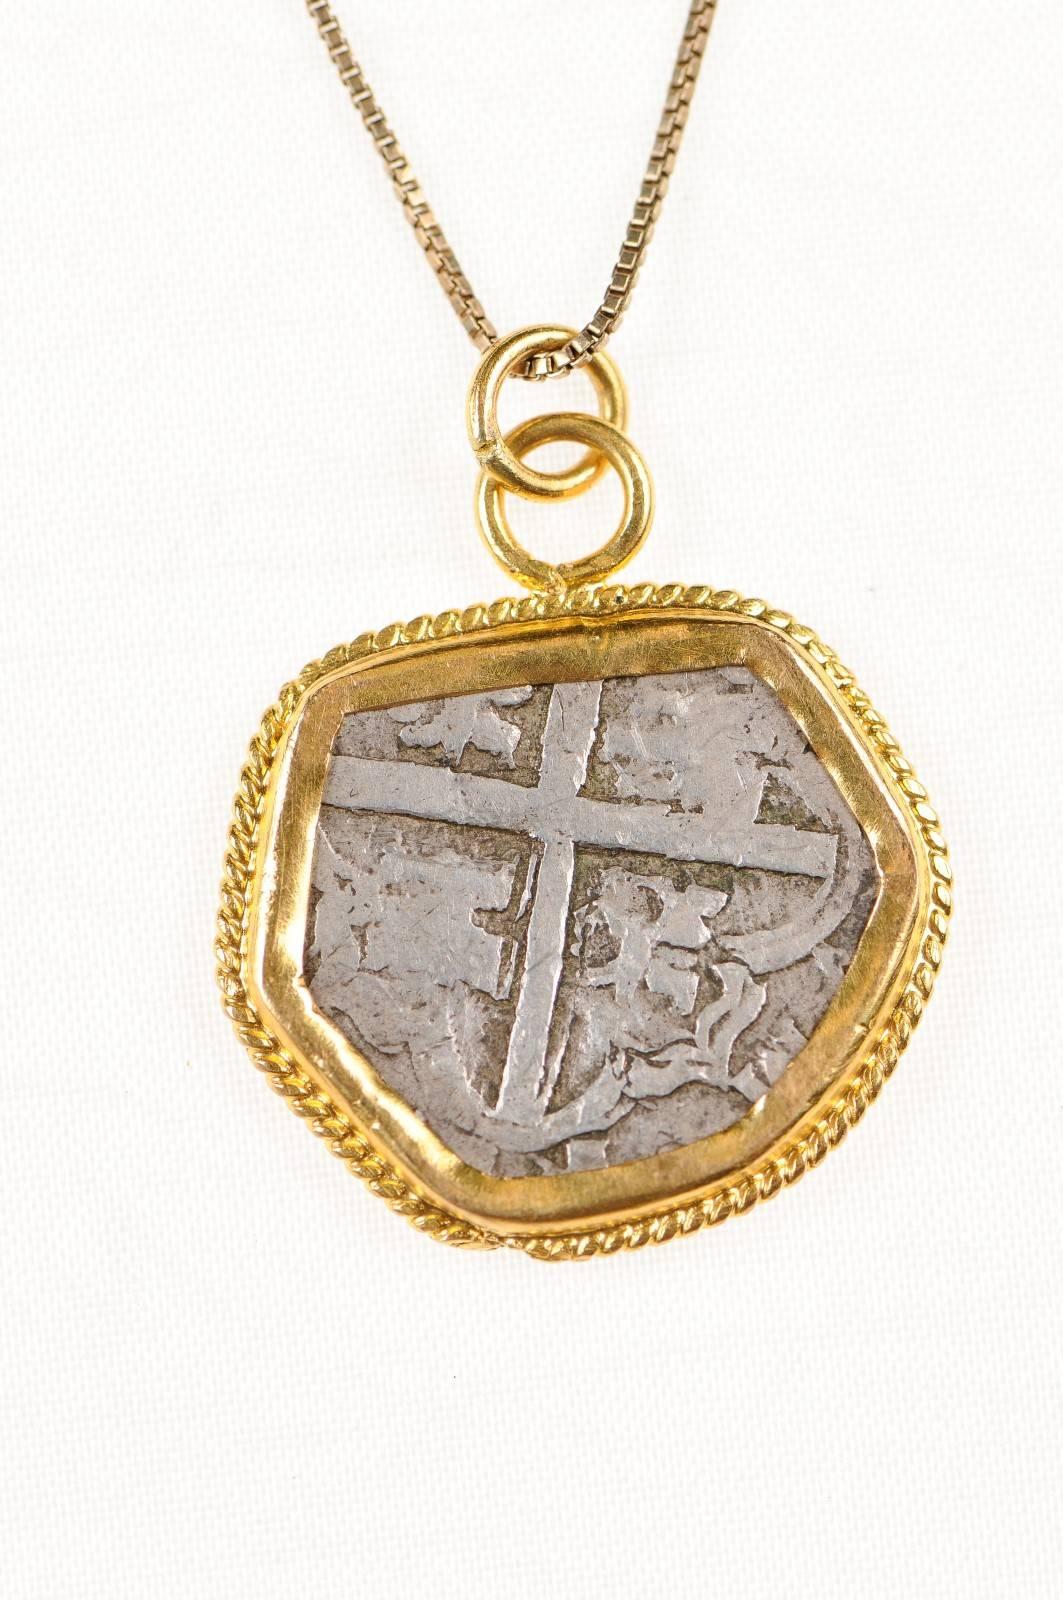 Spanish Silver Cob Coin circa 1500s Set in Rope Accented 22 Karat Gold Bezel For Sale 2